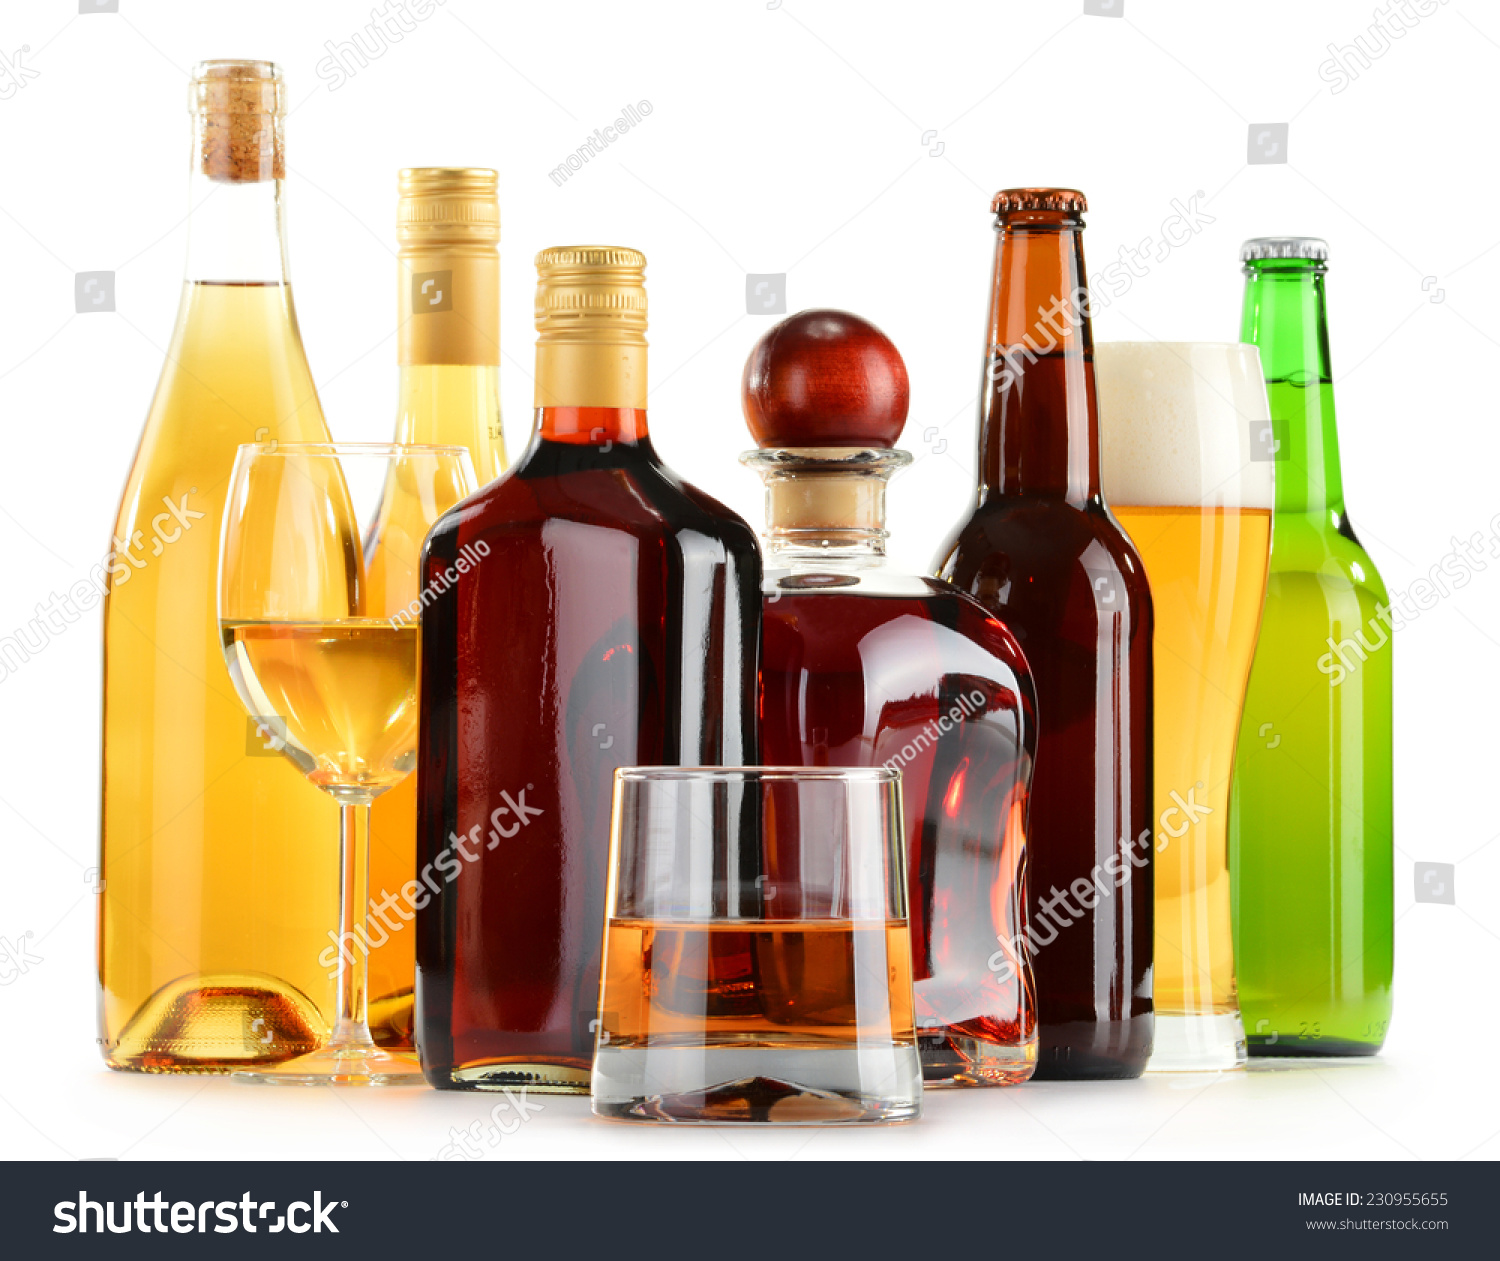 Bottles and glasses of assorted alcoholic beverages isolated on white background #230955655